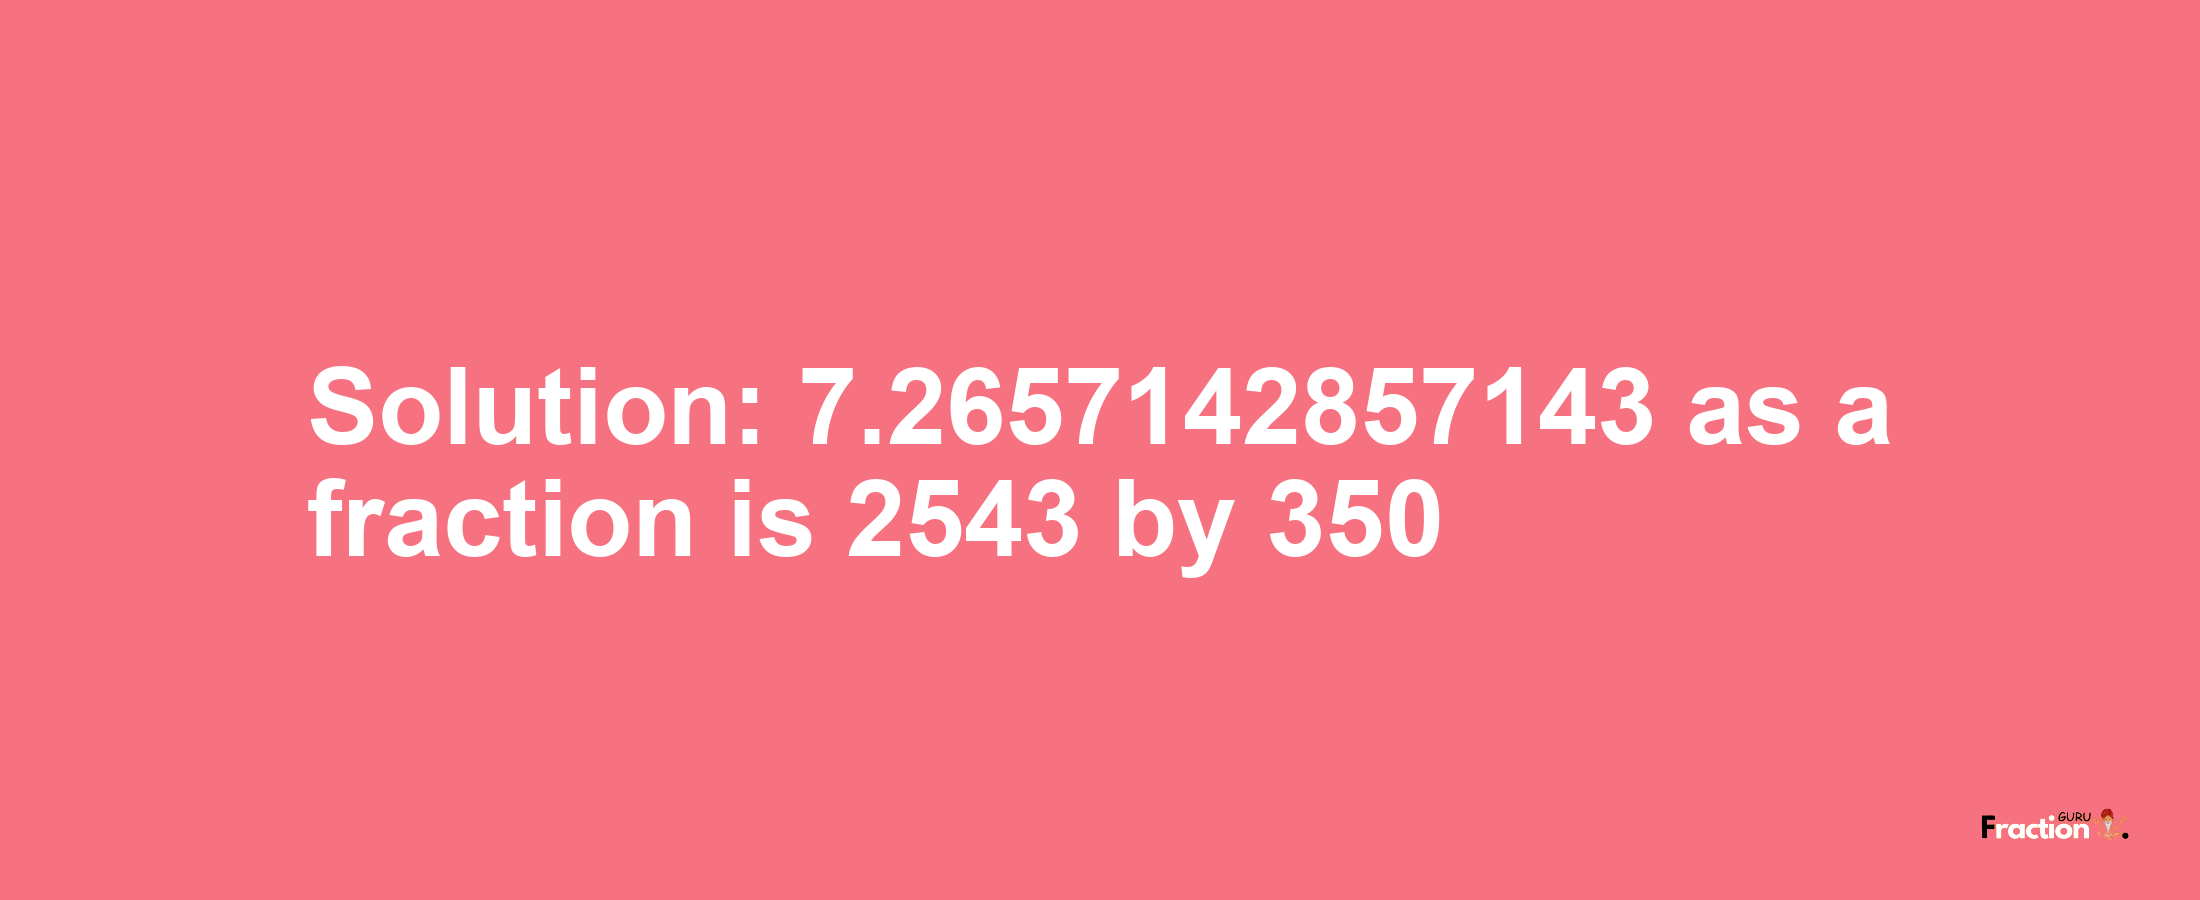 Solution:7.2657142857143 as a fraction is 2543/350